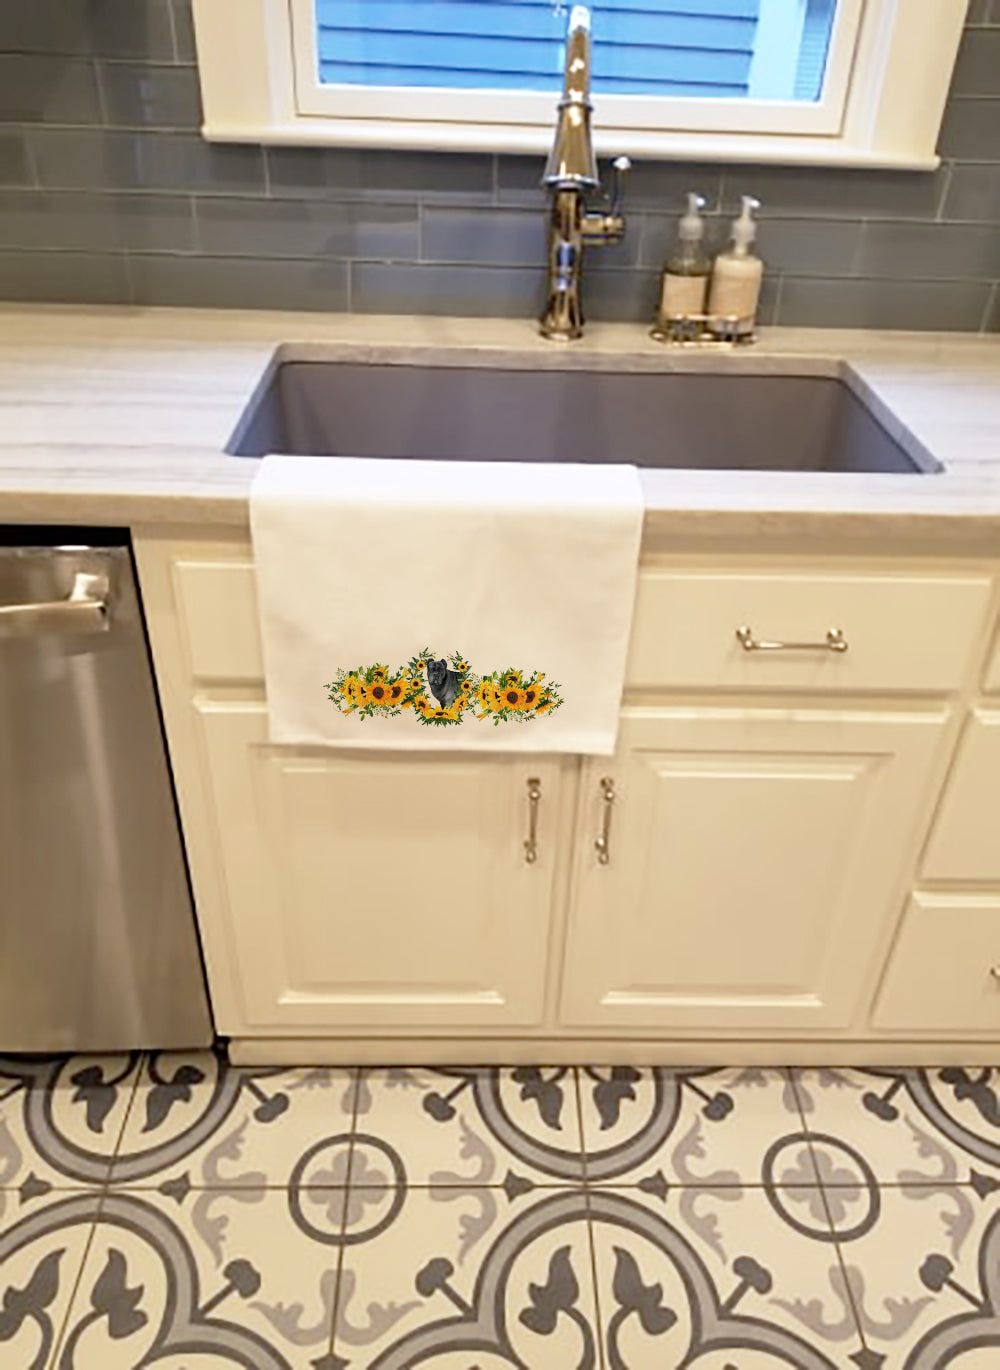 Buy this Cane Corso in Sunflowers White Kitchen Towel Set of 2